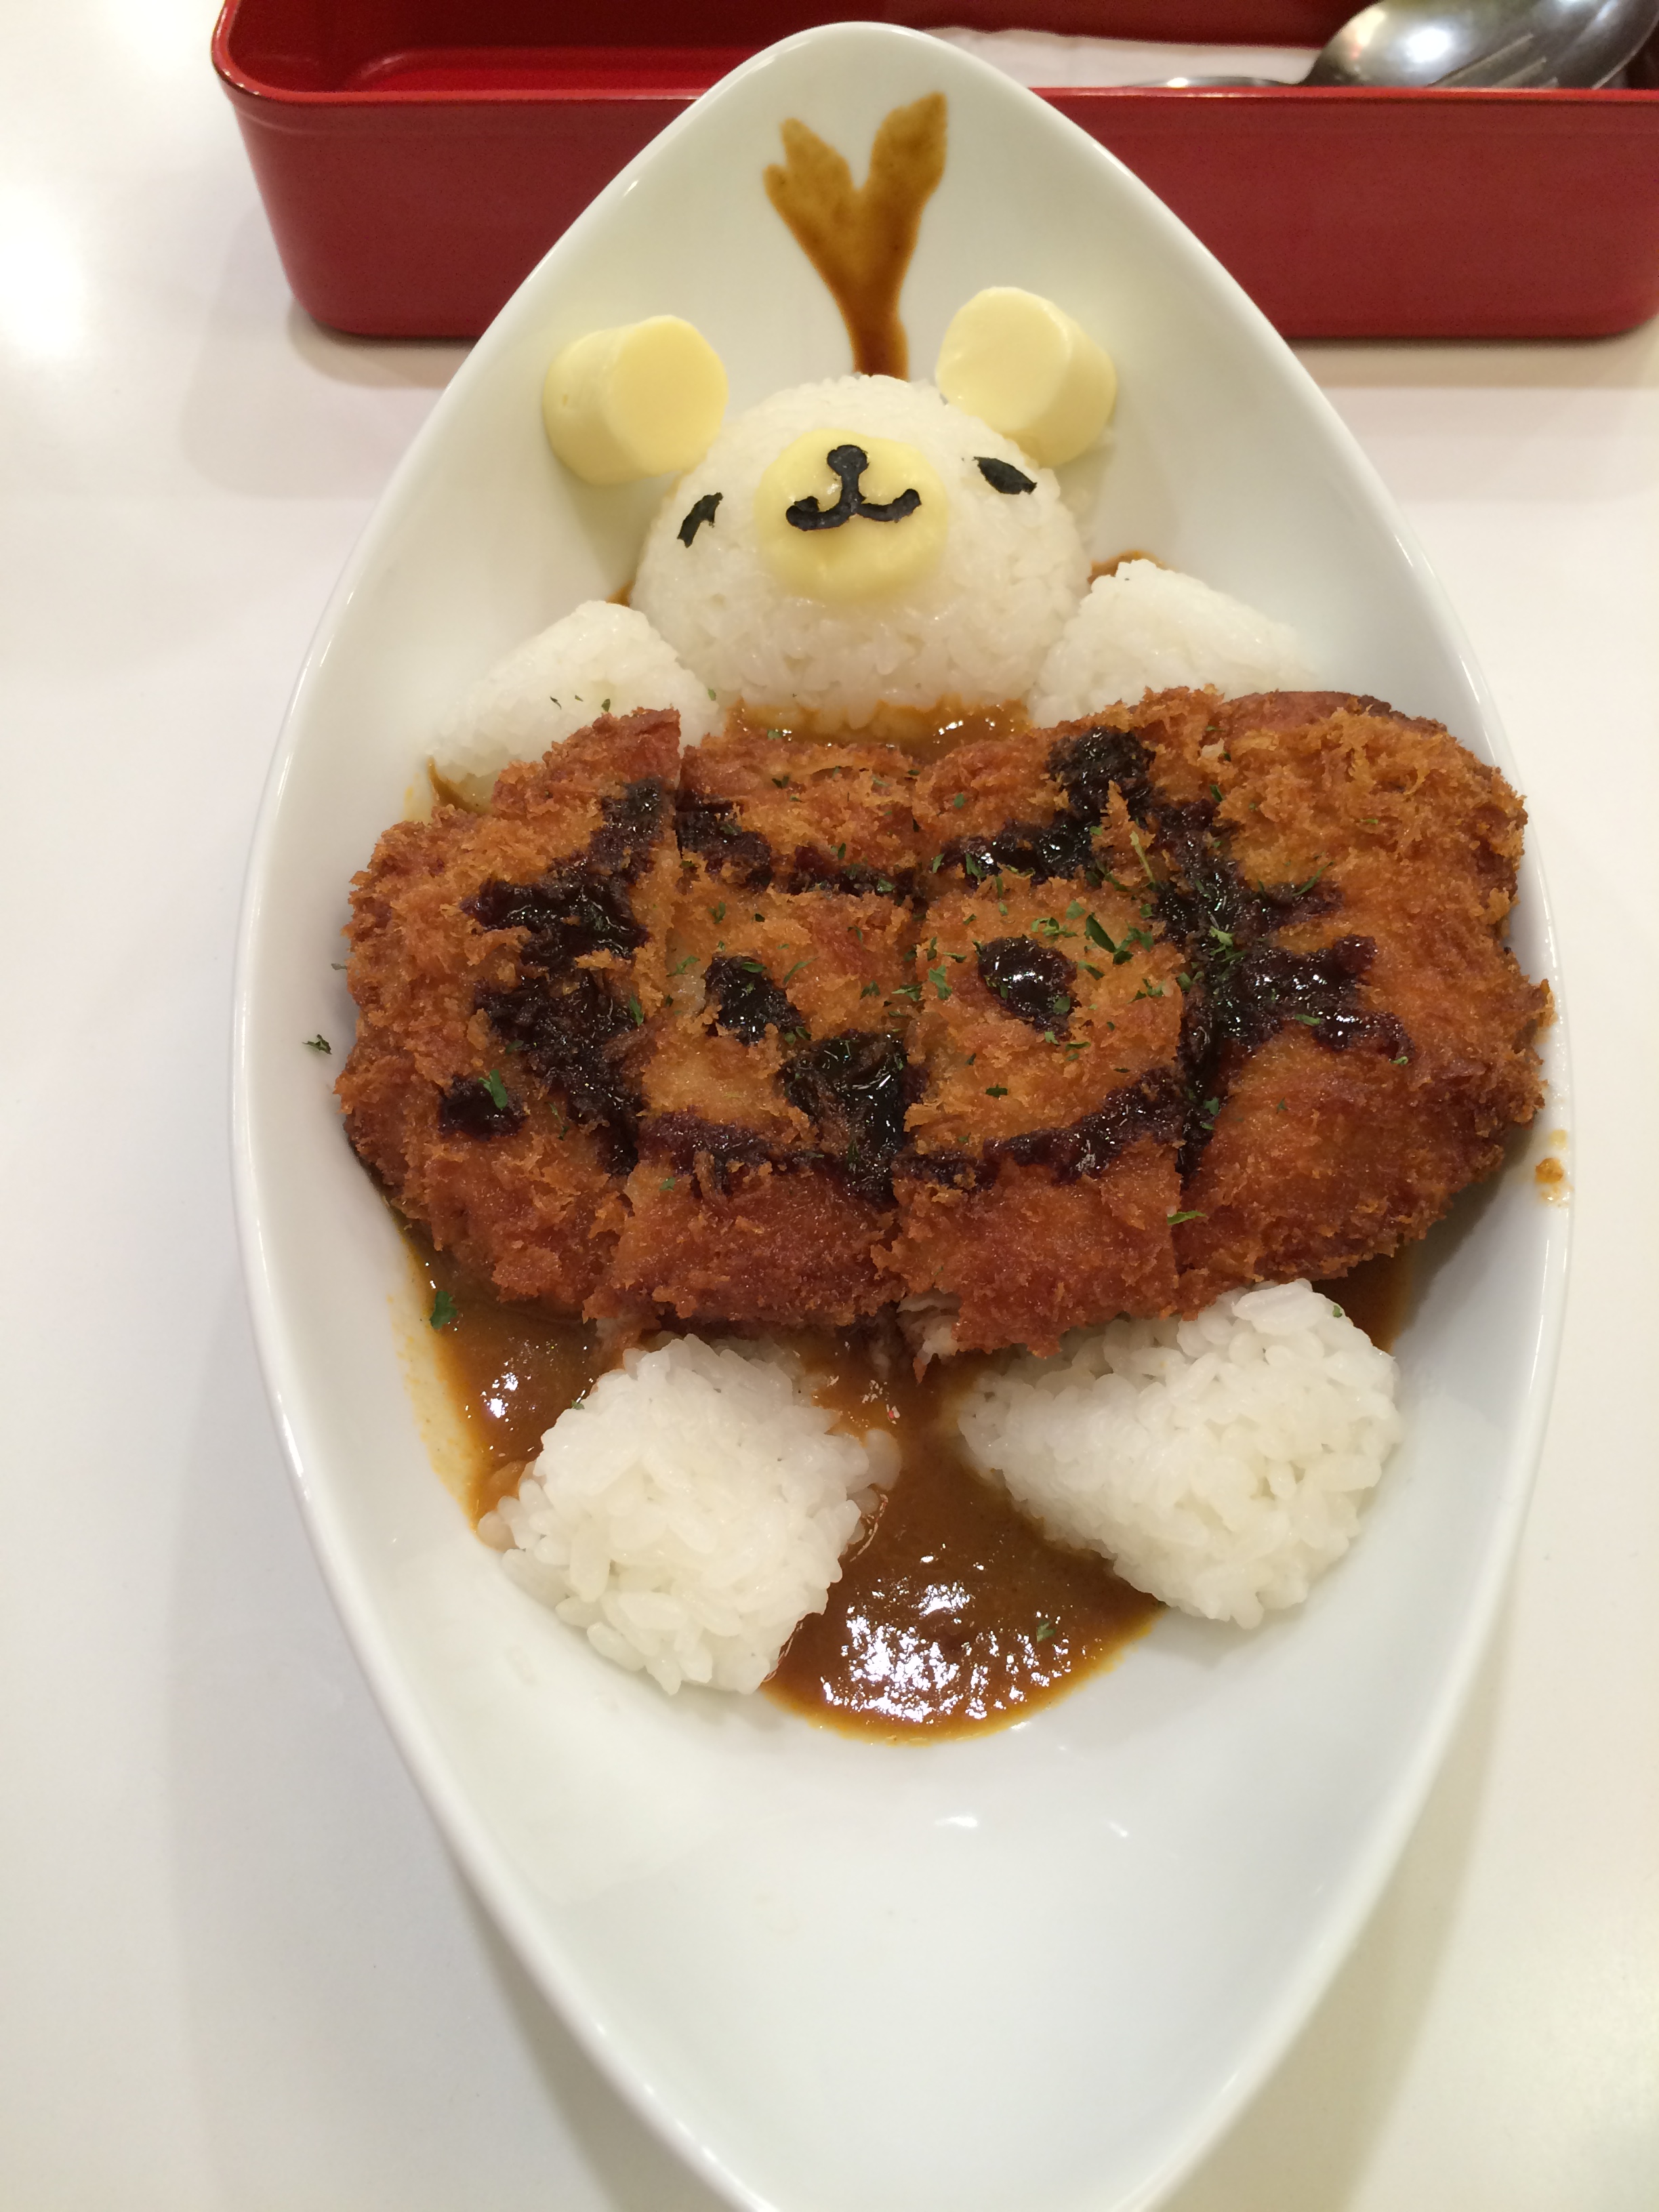 Curry rice in the shape of a bear!